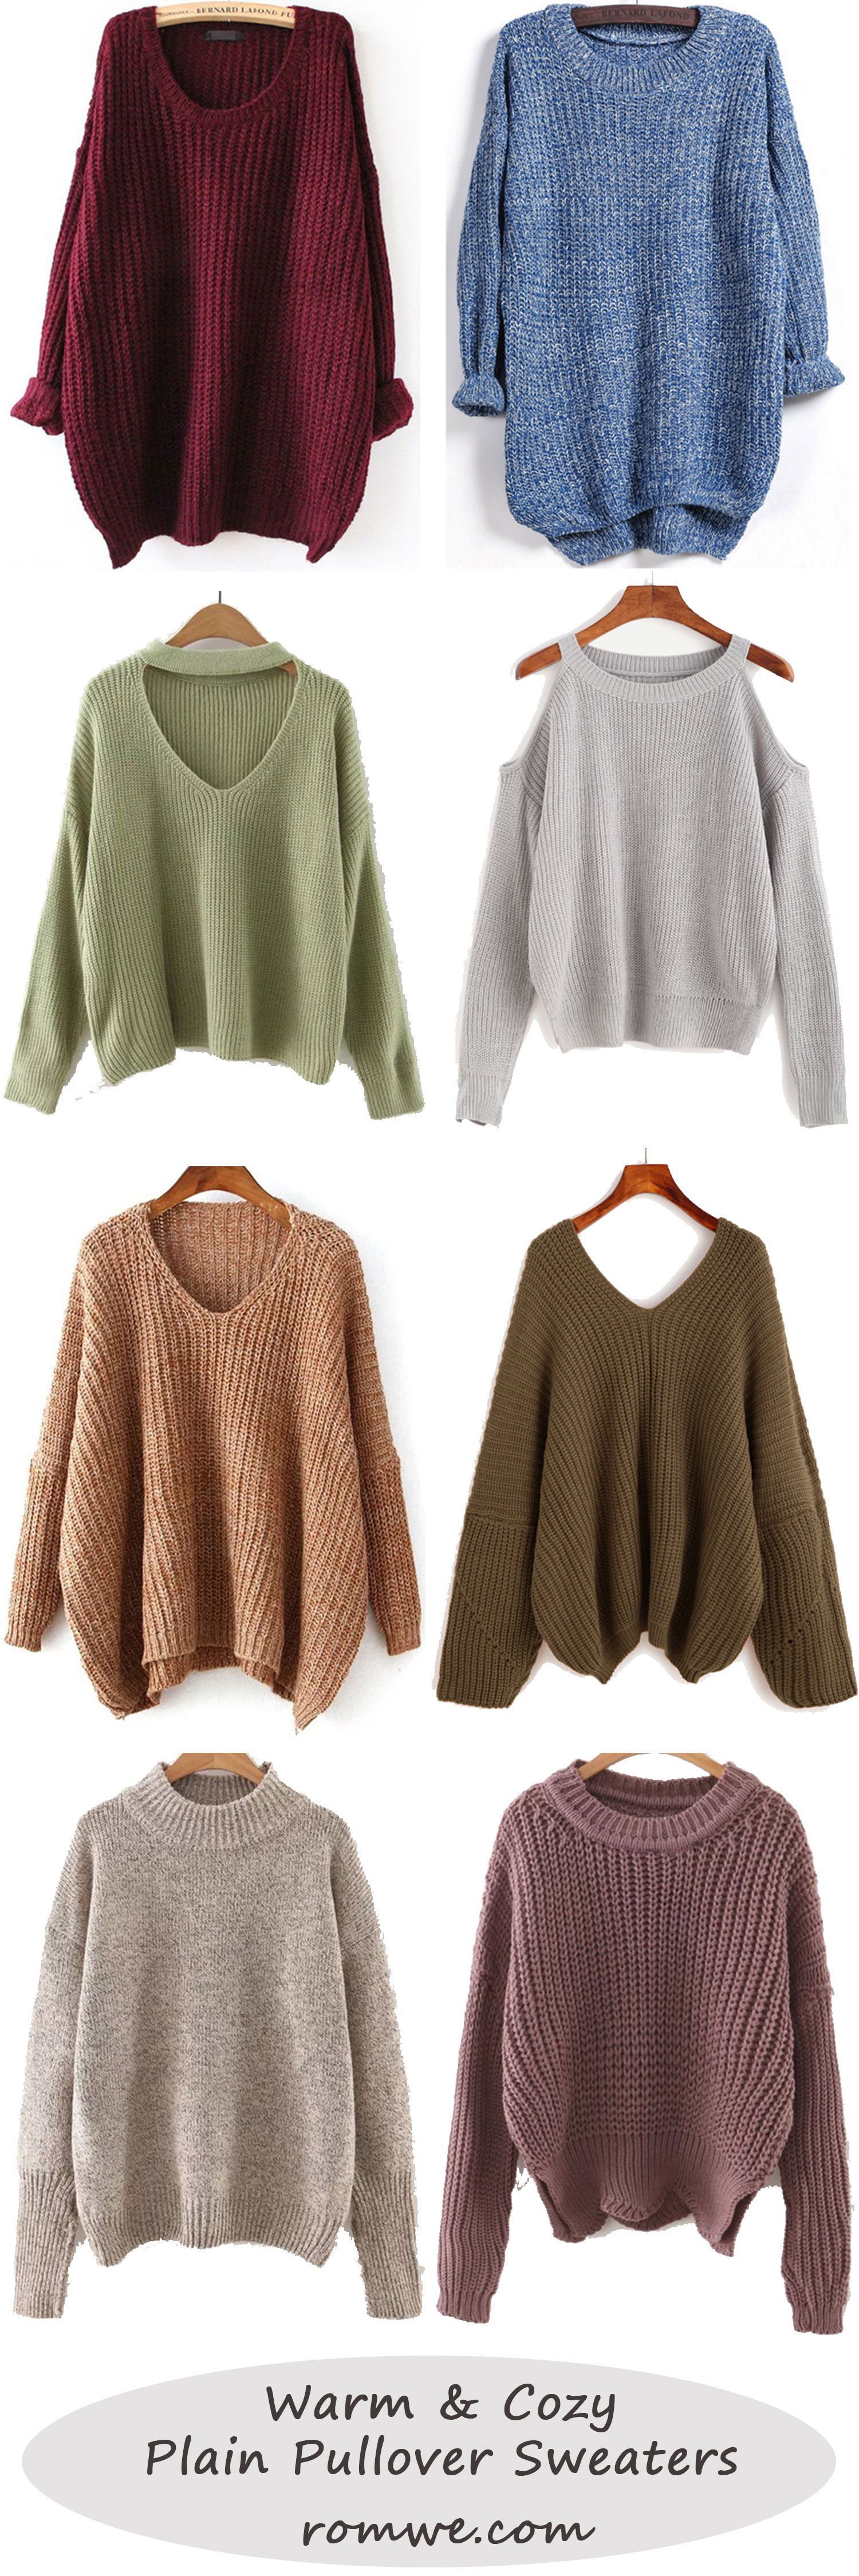 Cozy in the right way with soft material & easy return!  Keep it chic all day with romwe.com.